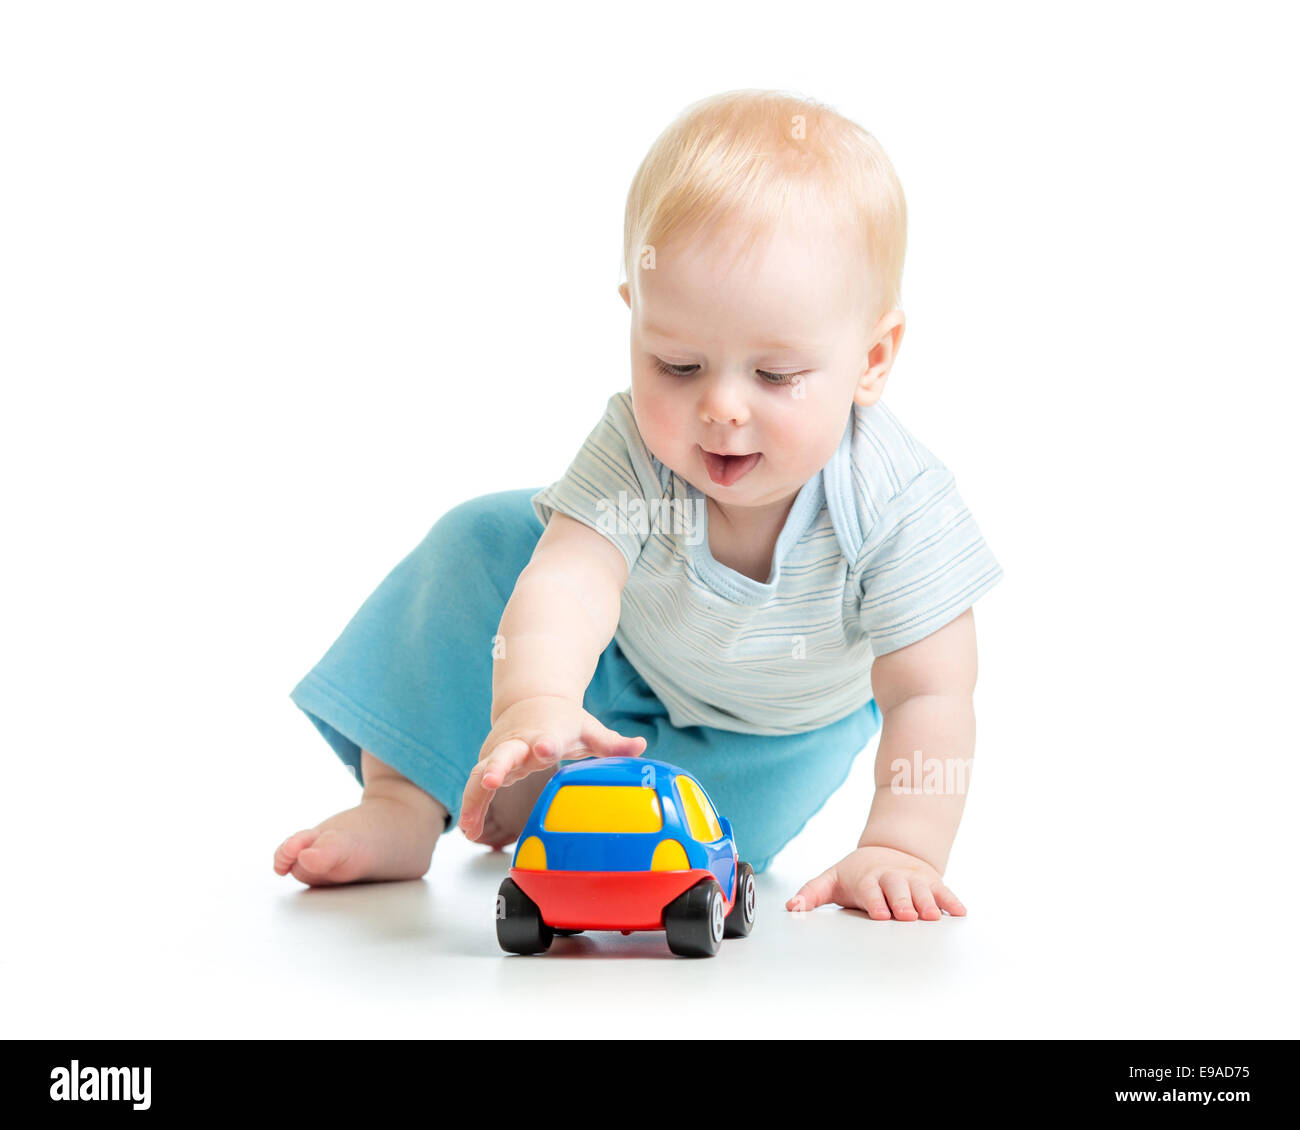 Funny boy kid Playing with toy car Banque D'Images